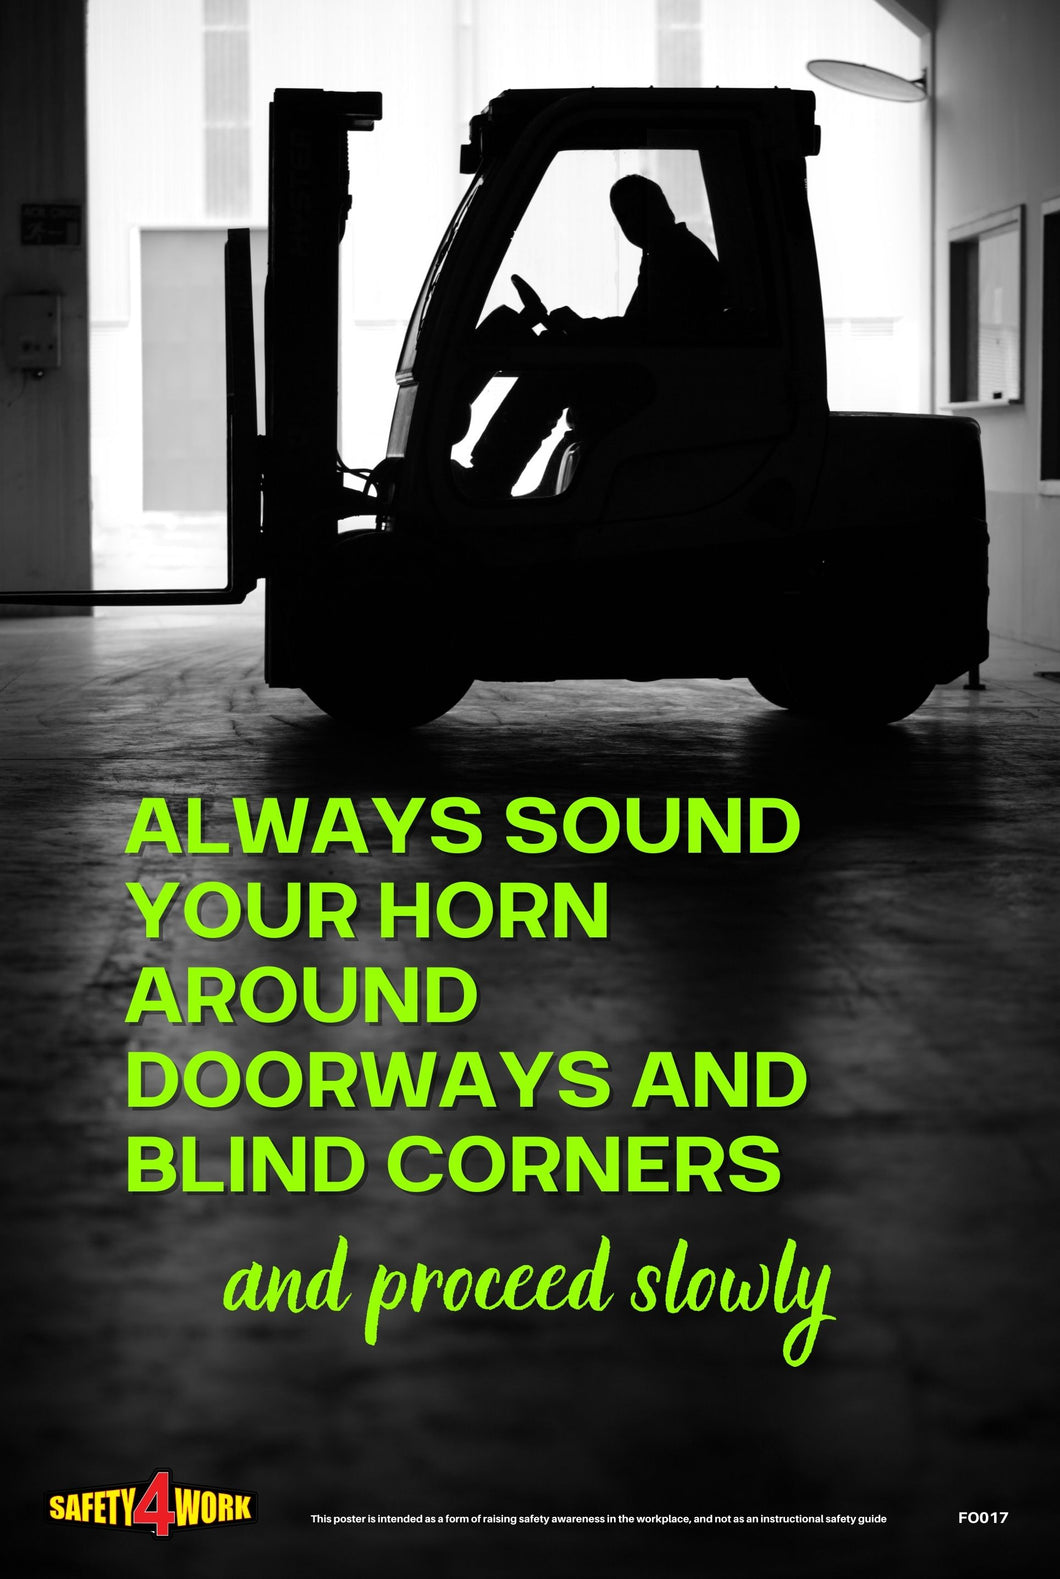 ALWAYS SOUND YOUR HORN AROUND DOORWAYS AND BLIND CORNERS AND PROCEED SLOWLY, forklift, safety, speed, horn, blind corners, doorways